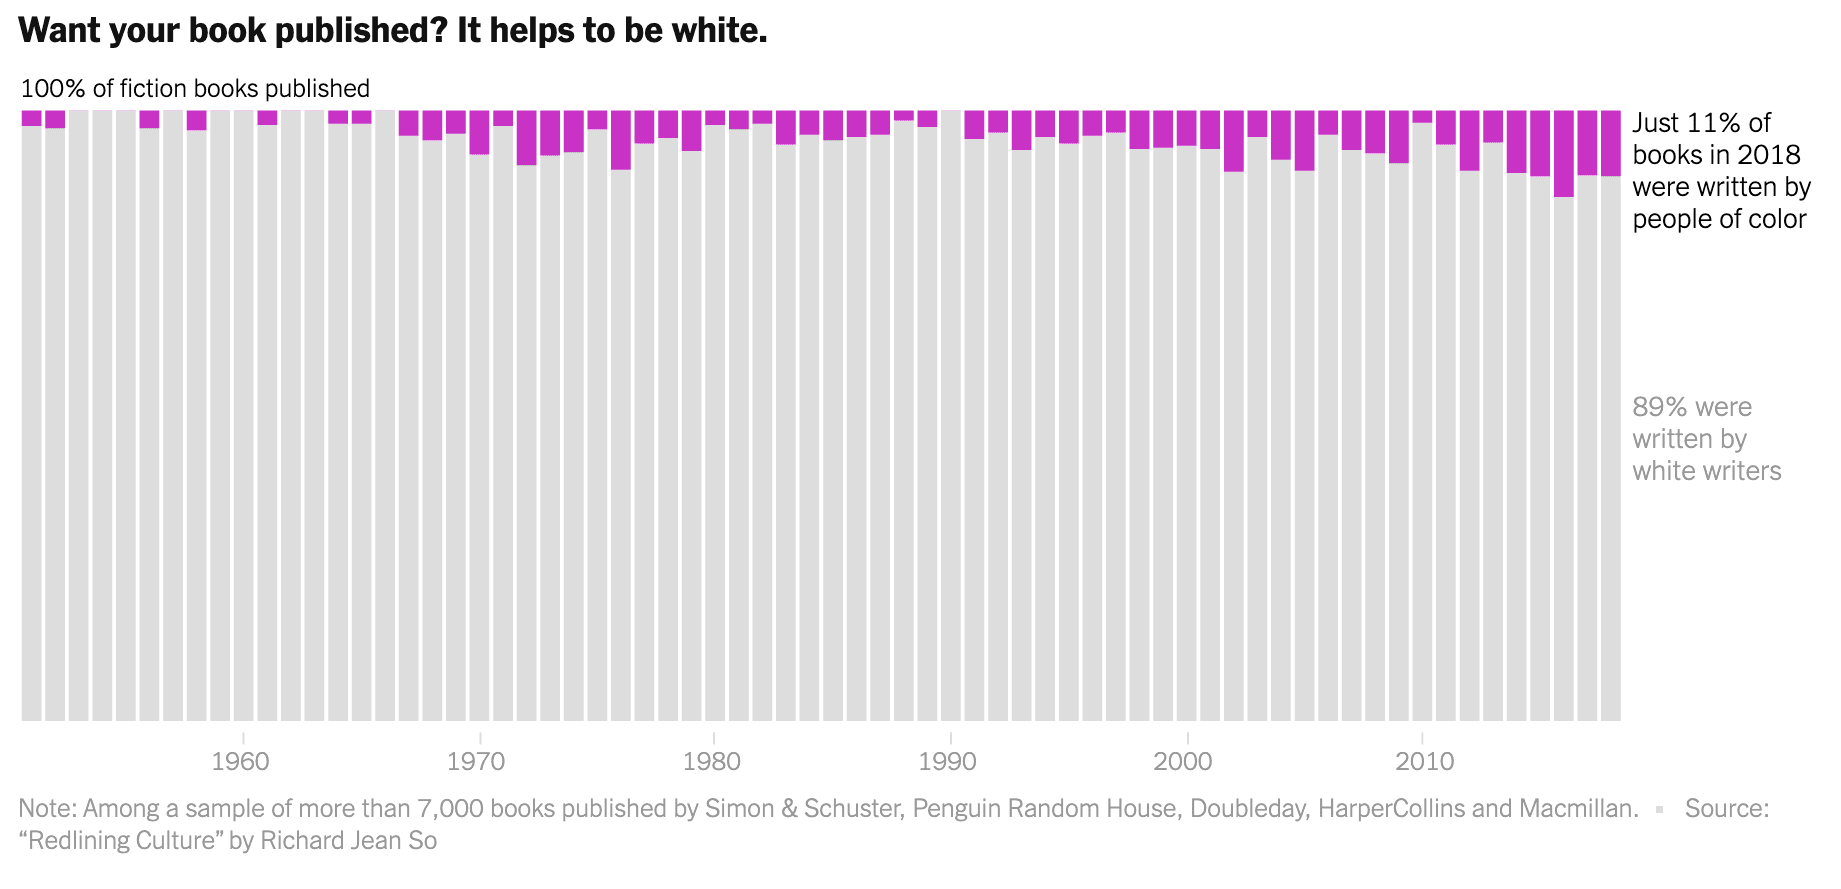 Graph to visualize the percentage of books published each year by people of color. 11% of books in 2018 were written by people of color. 